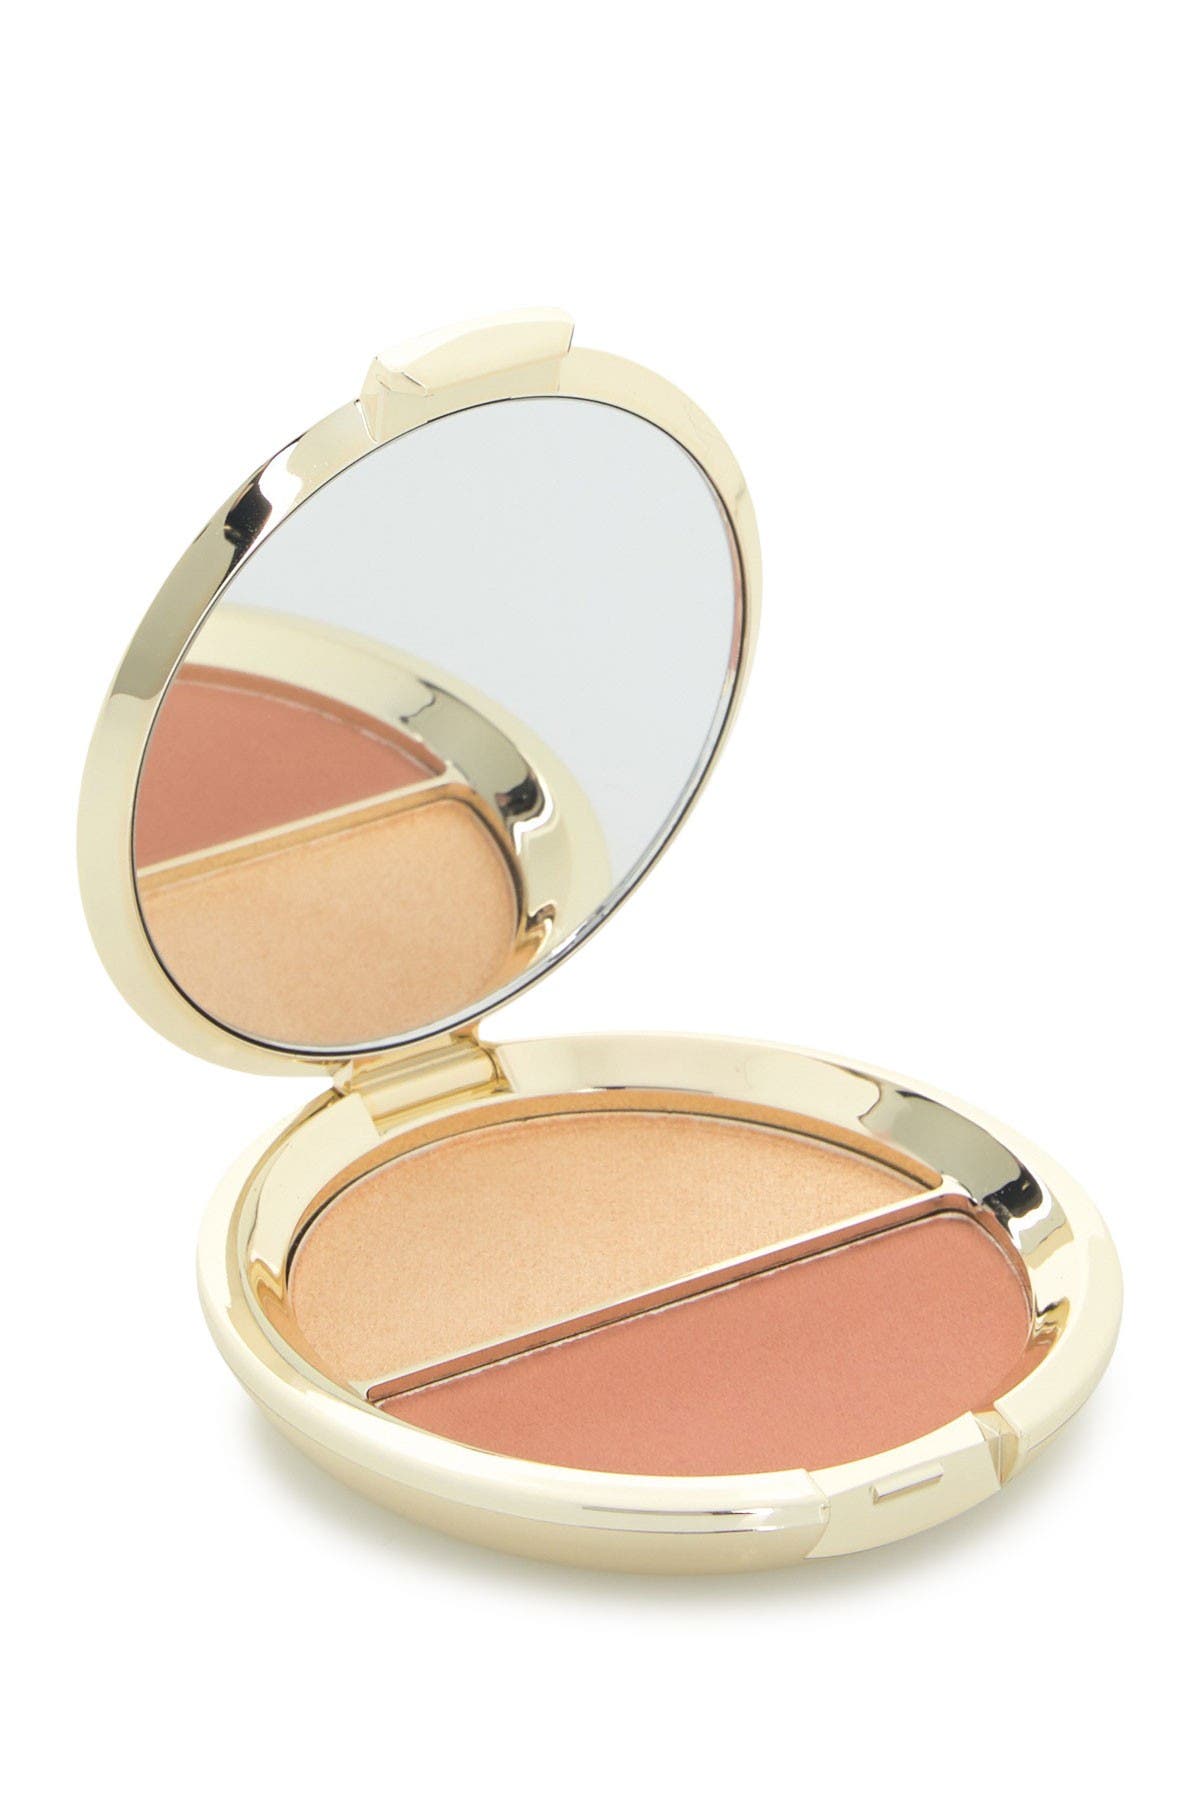 Becca Cosmetics Shimmering Skin Perfector Highlighter & Blush Duo